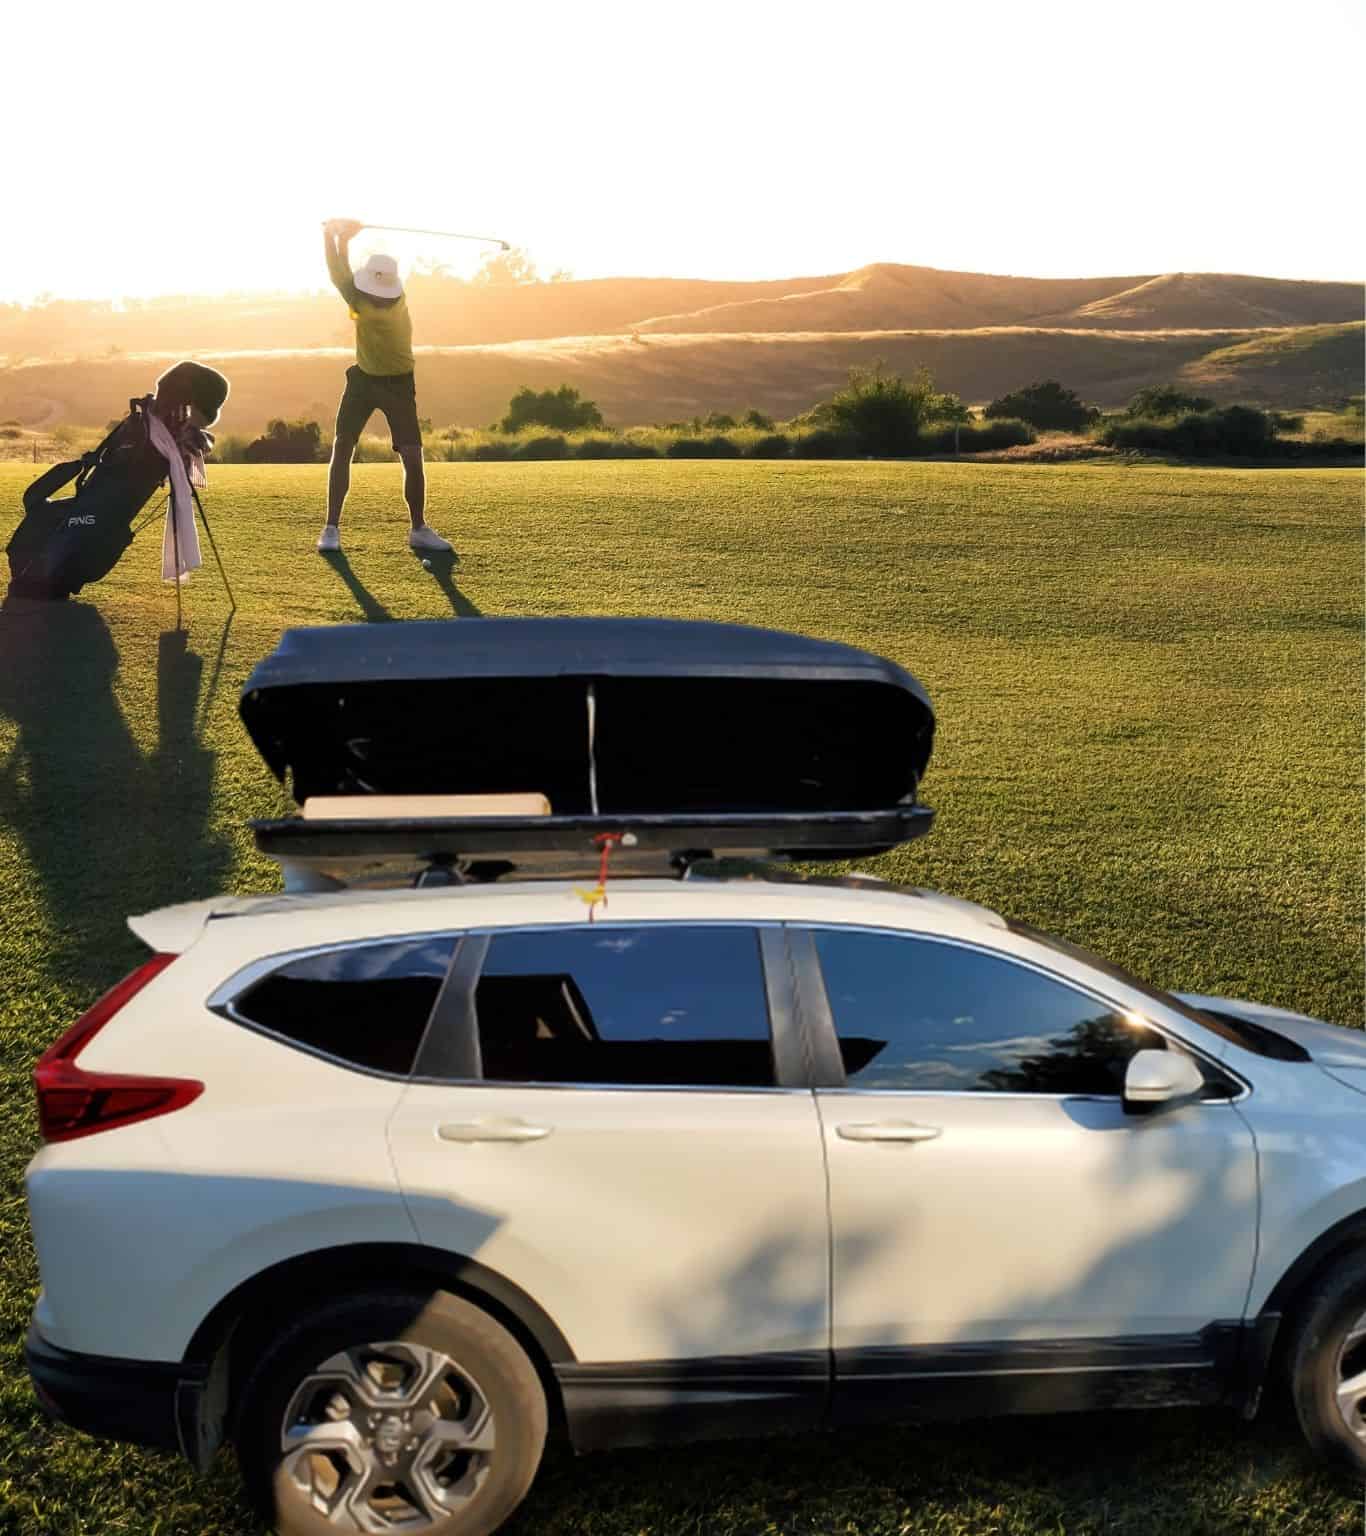 You can load your golf clubs or gear into a car rooftop luggage roof box and transport them between places.